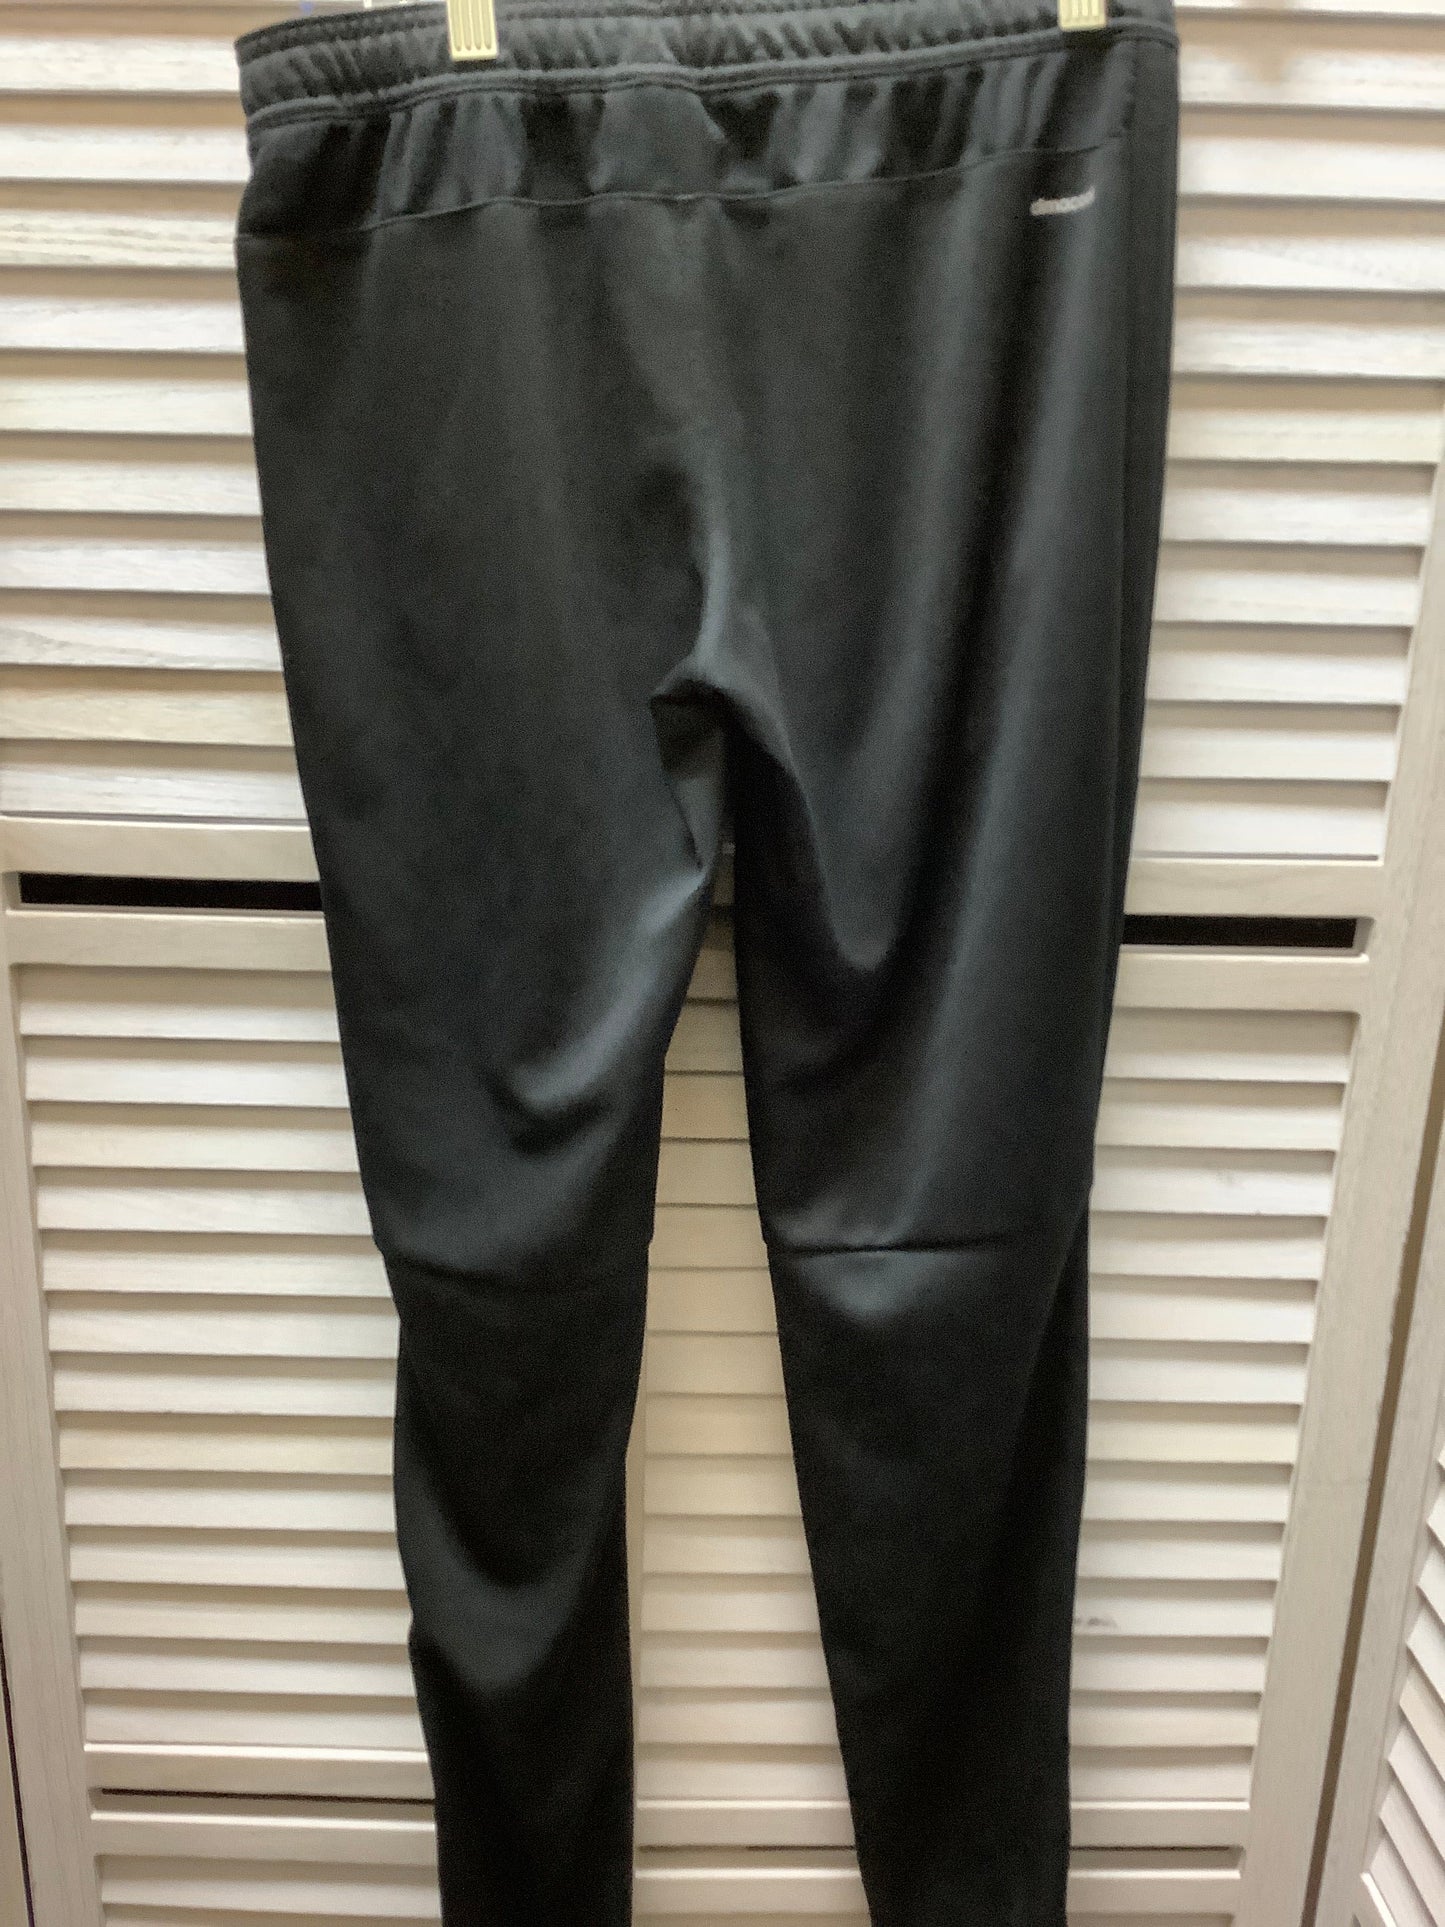 Athletic Pants By Adidas  Size: S